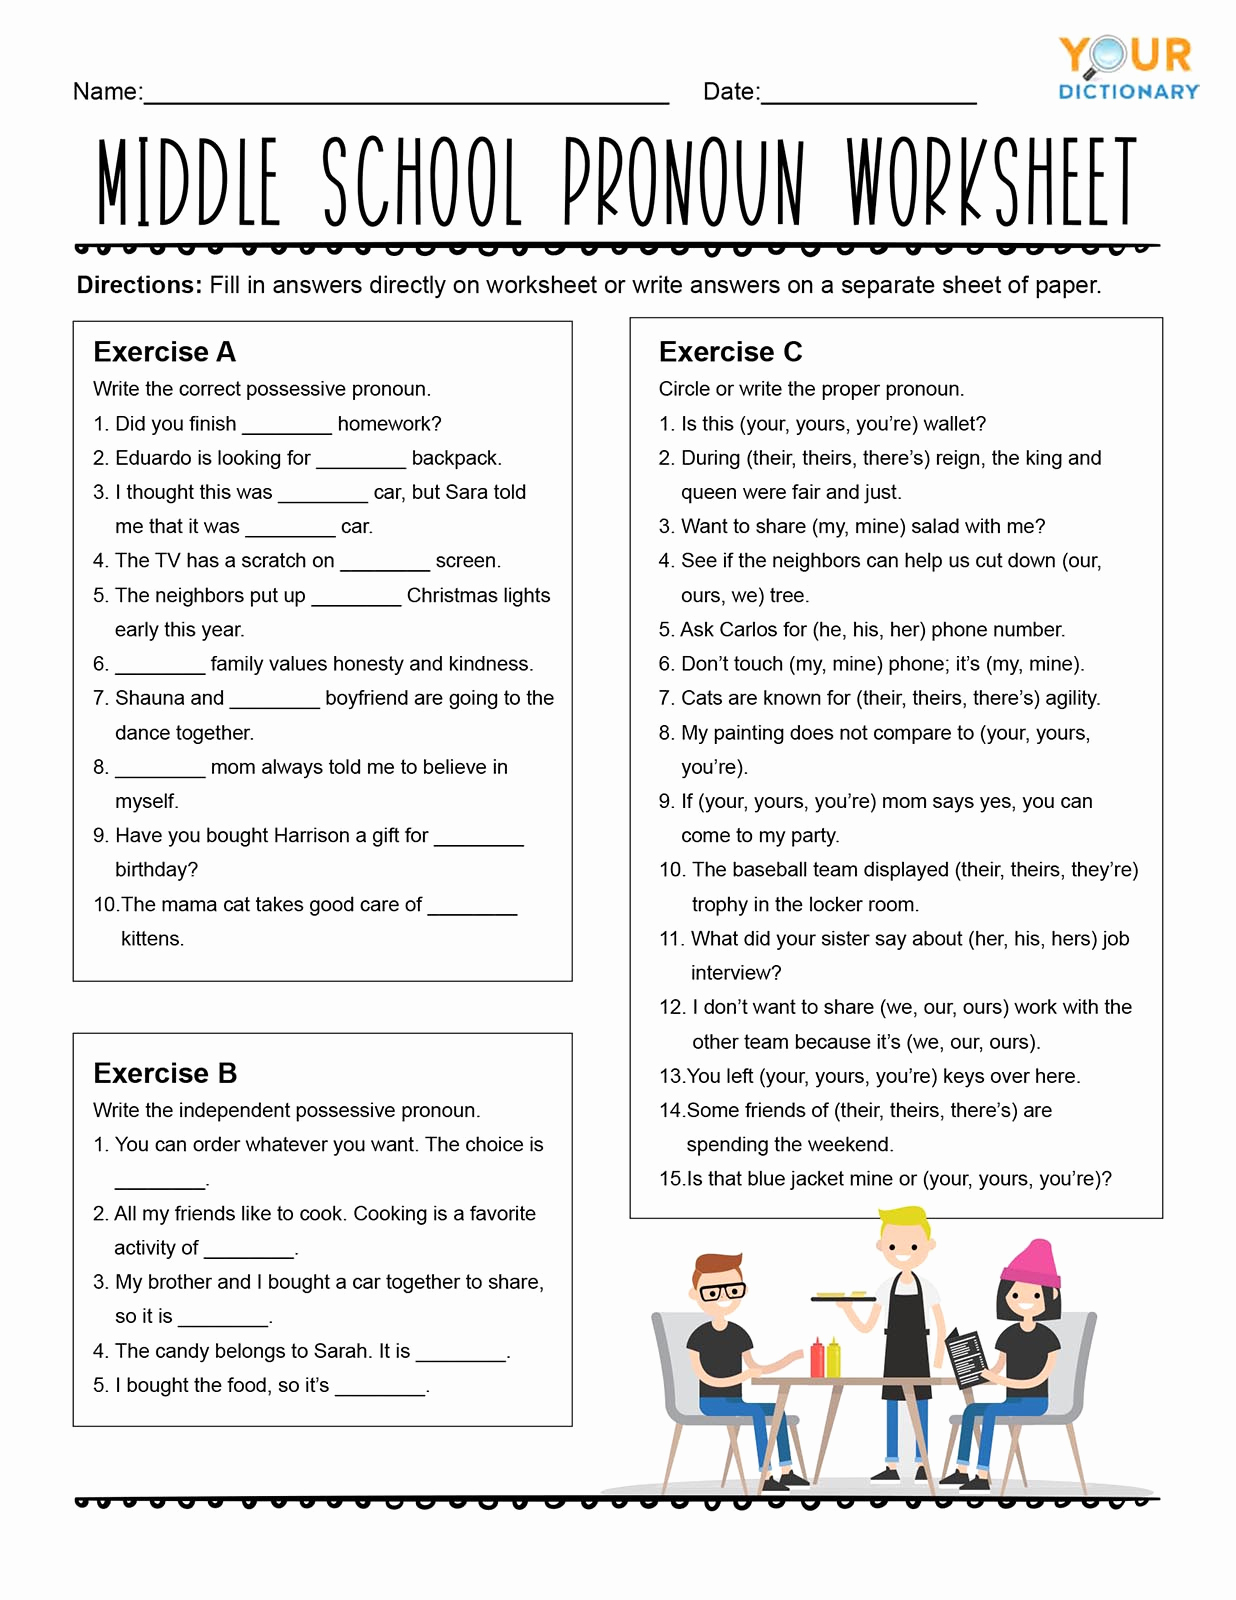 Grammar Worksheets Middle School Pdf Best Of Pronoun Worksheets for Practice and Review